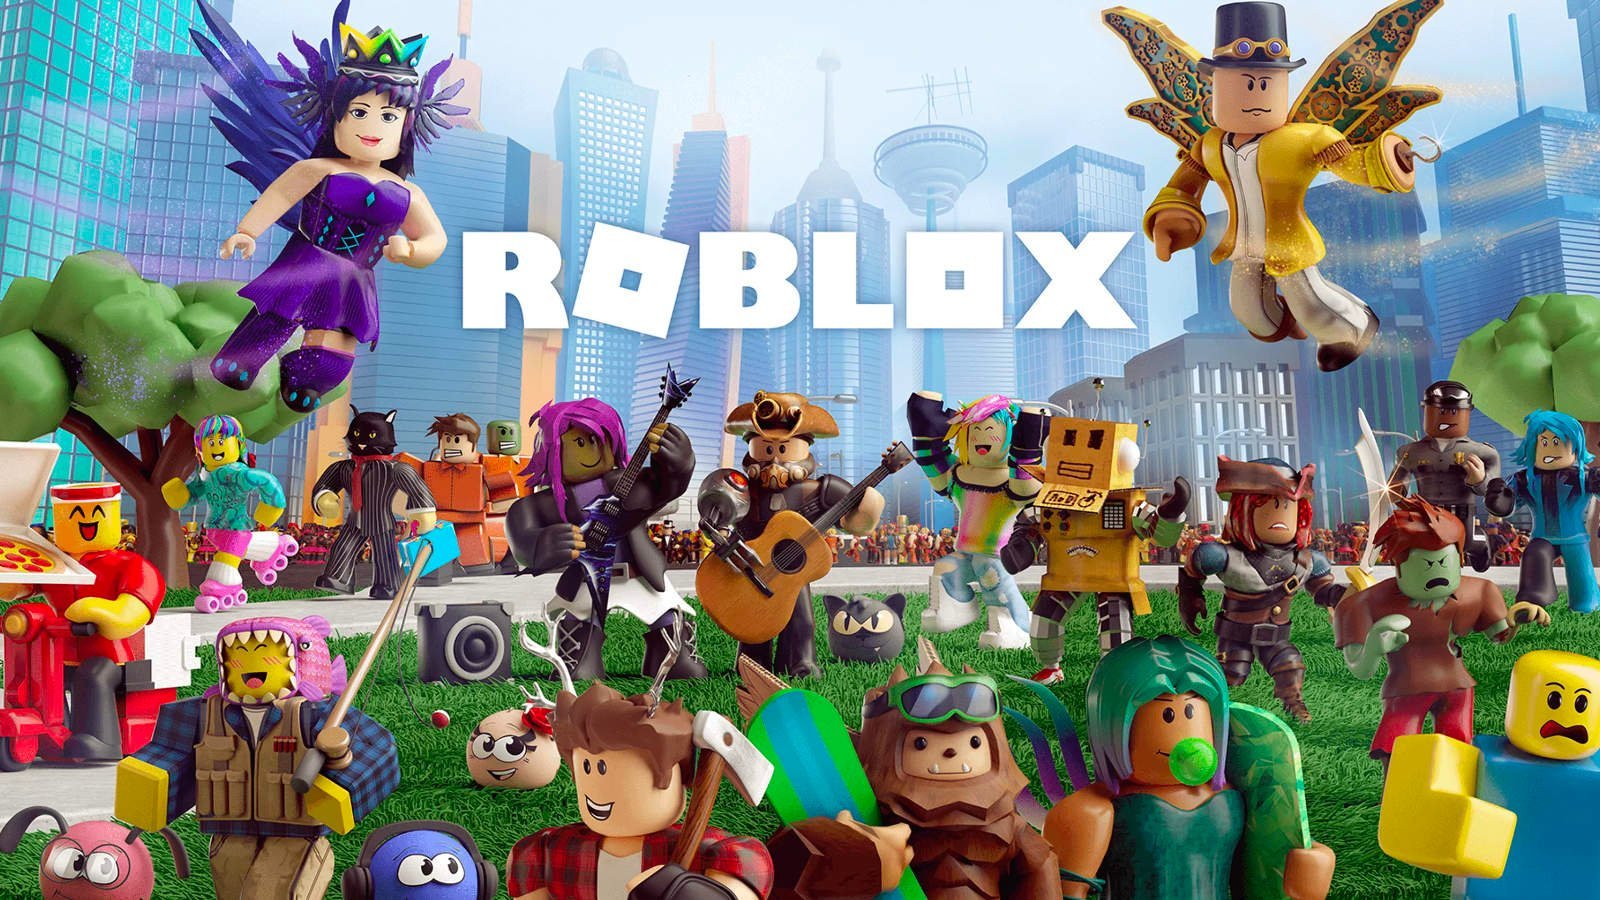 Roblox Promo Codes List Redeem Free Items Robux And Clothes - roblox codes for items 2020 may